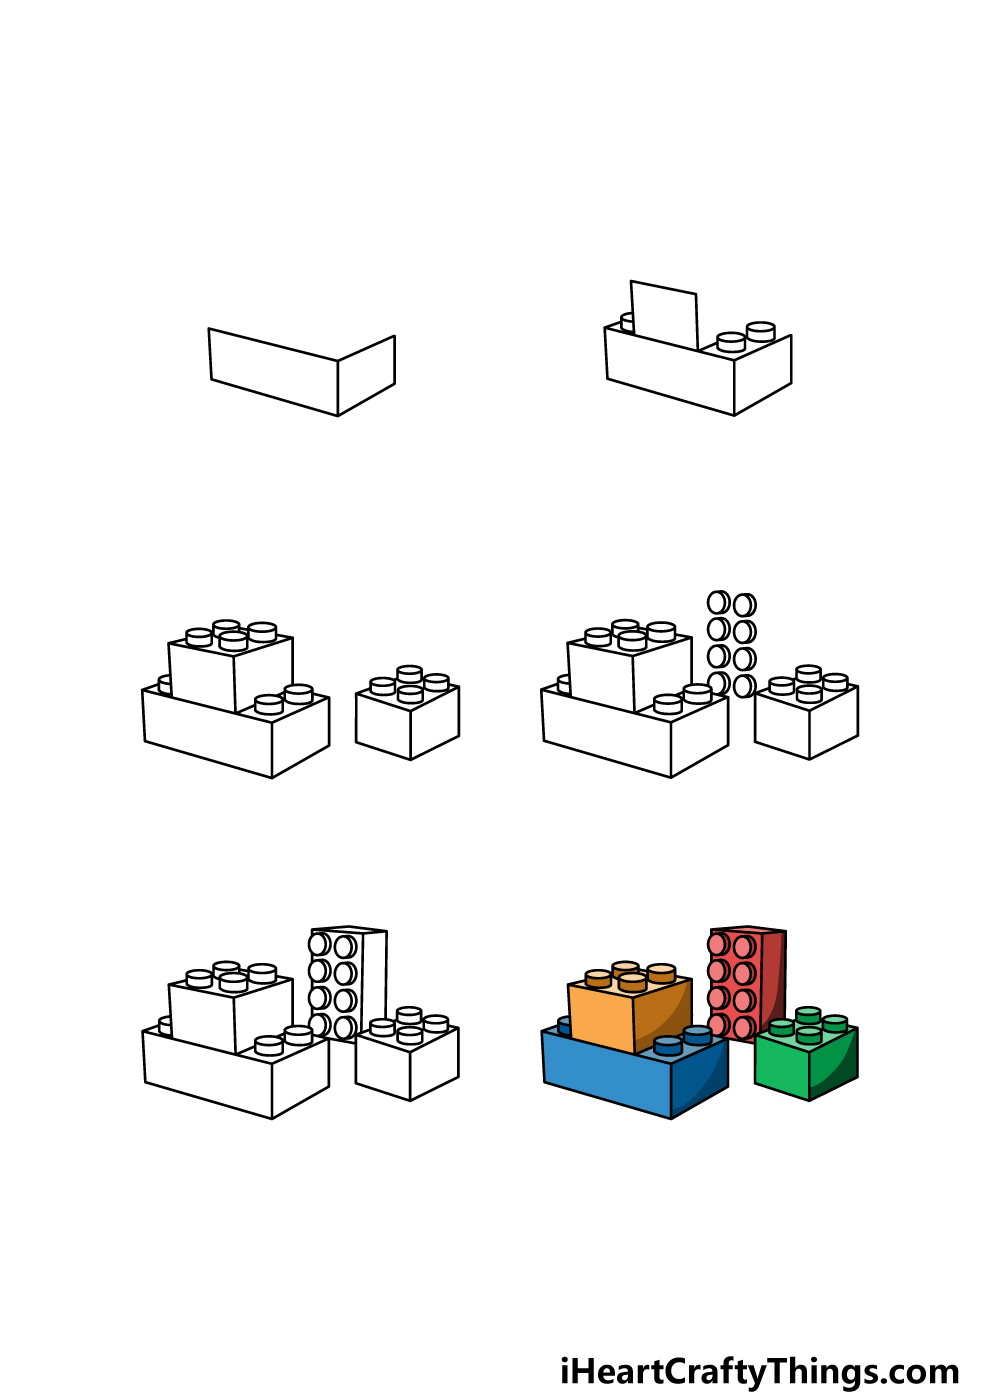 how to draw Lego in 6 steps